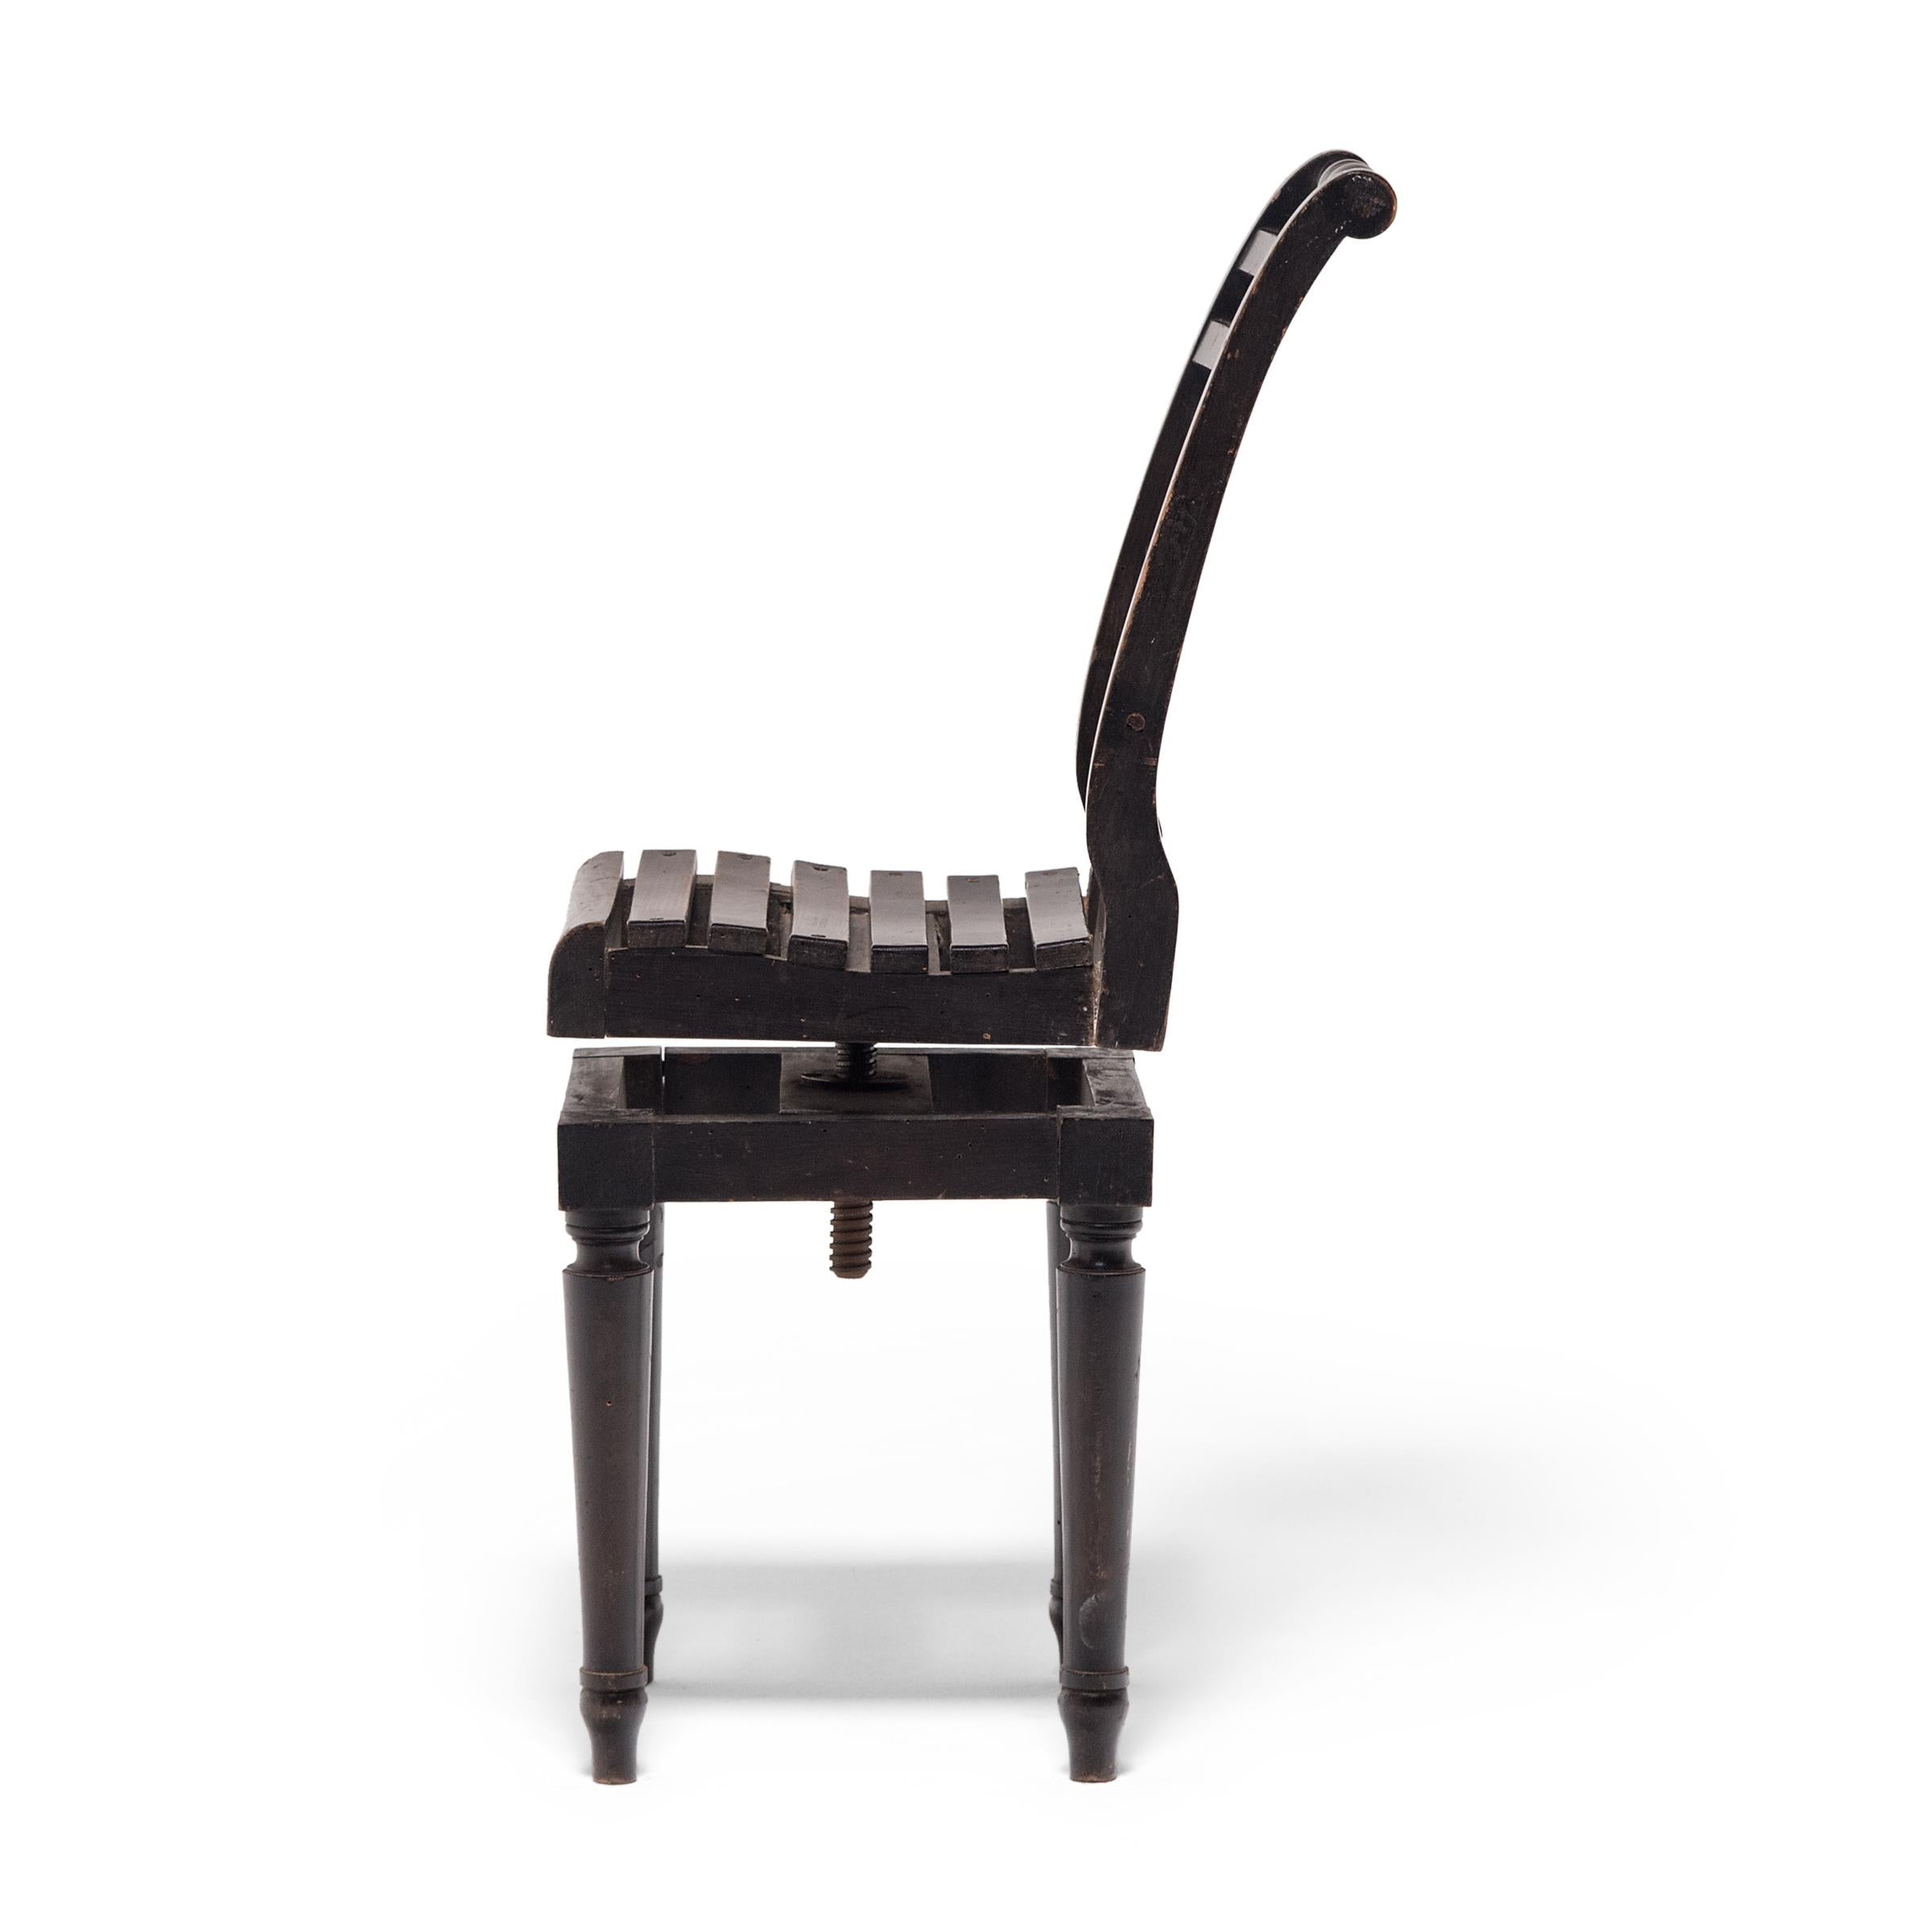 This unusual early 20th-century chair can be raised or lowered with just a turn of the seat. A chair in two parts, the slatted seat and high back are connected to the square base by a threaded iron rod and changes in height as its turned. Turned